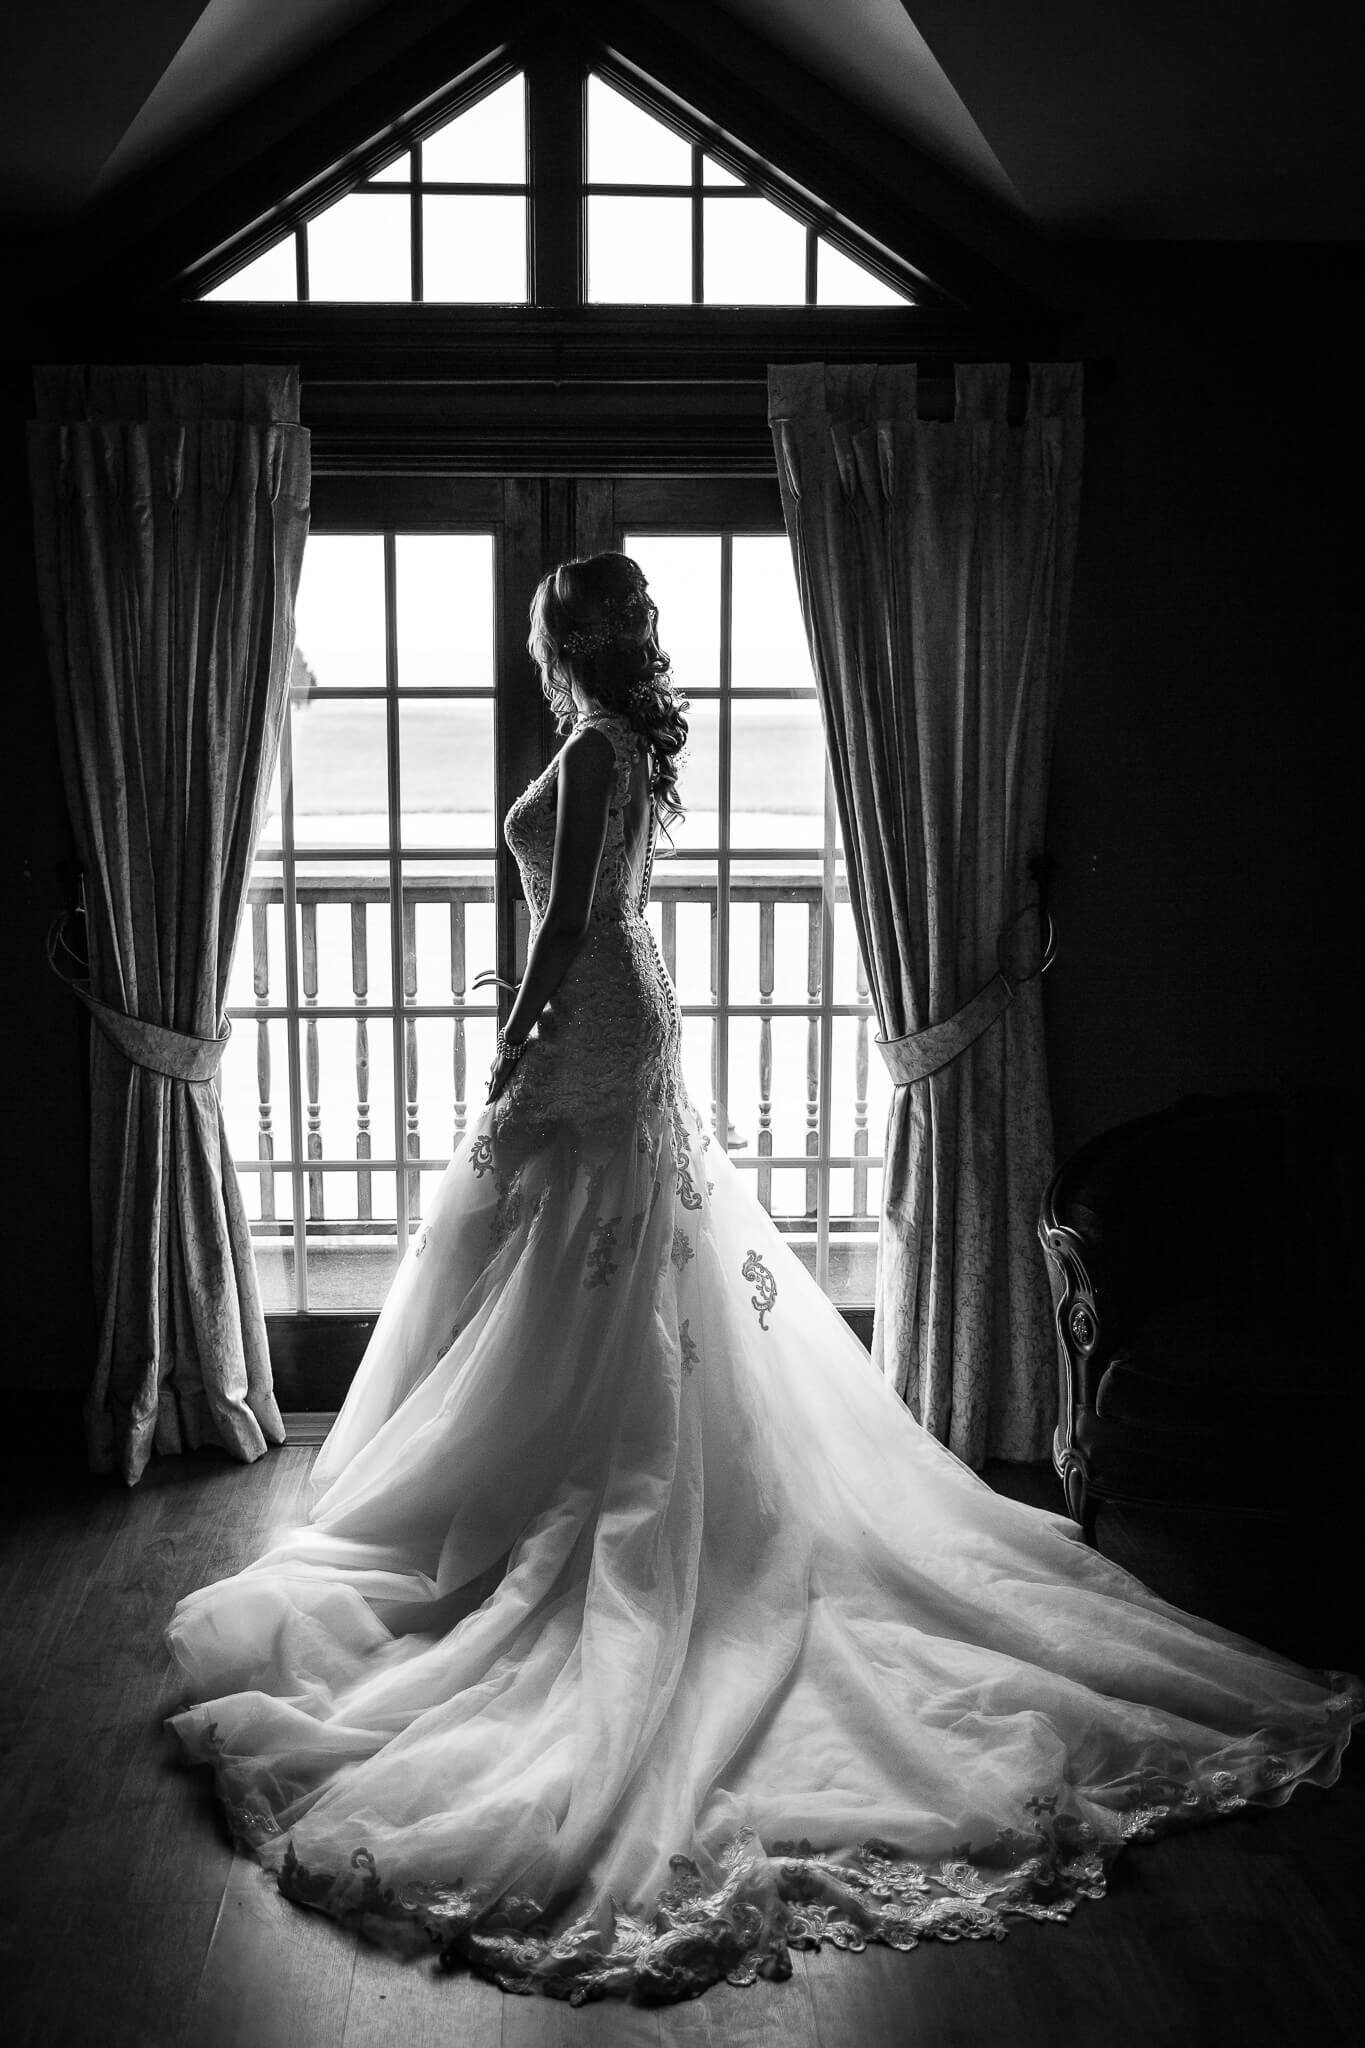 Dramatic silhouette of bride and bridal gown at Sprucewood Shores Winery in Leamington Ontario.